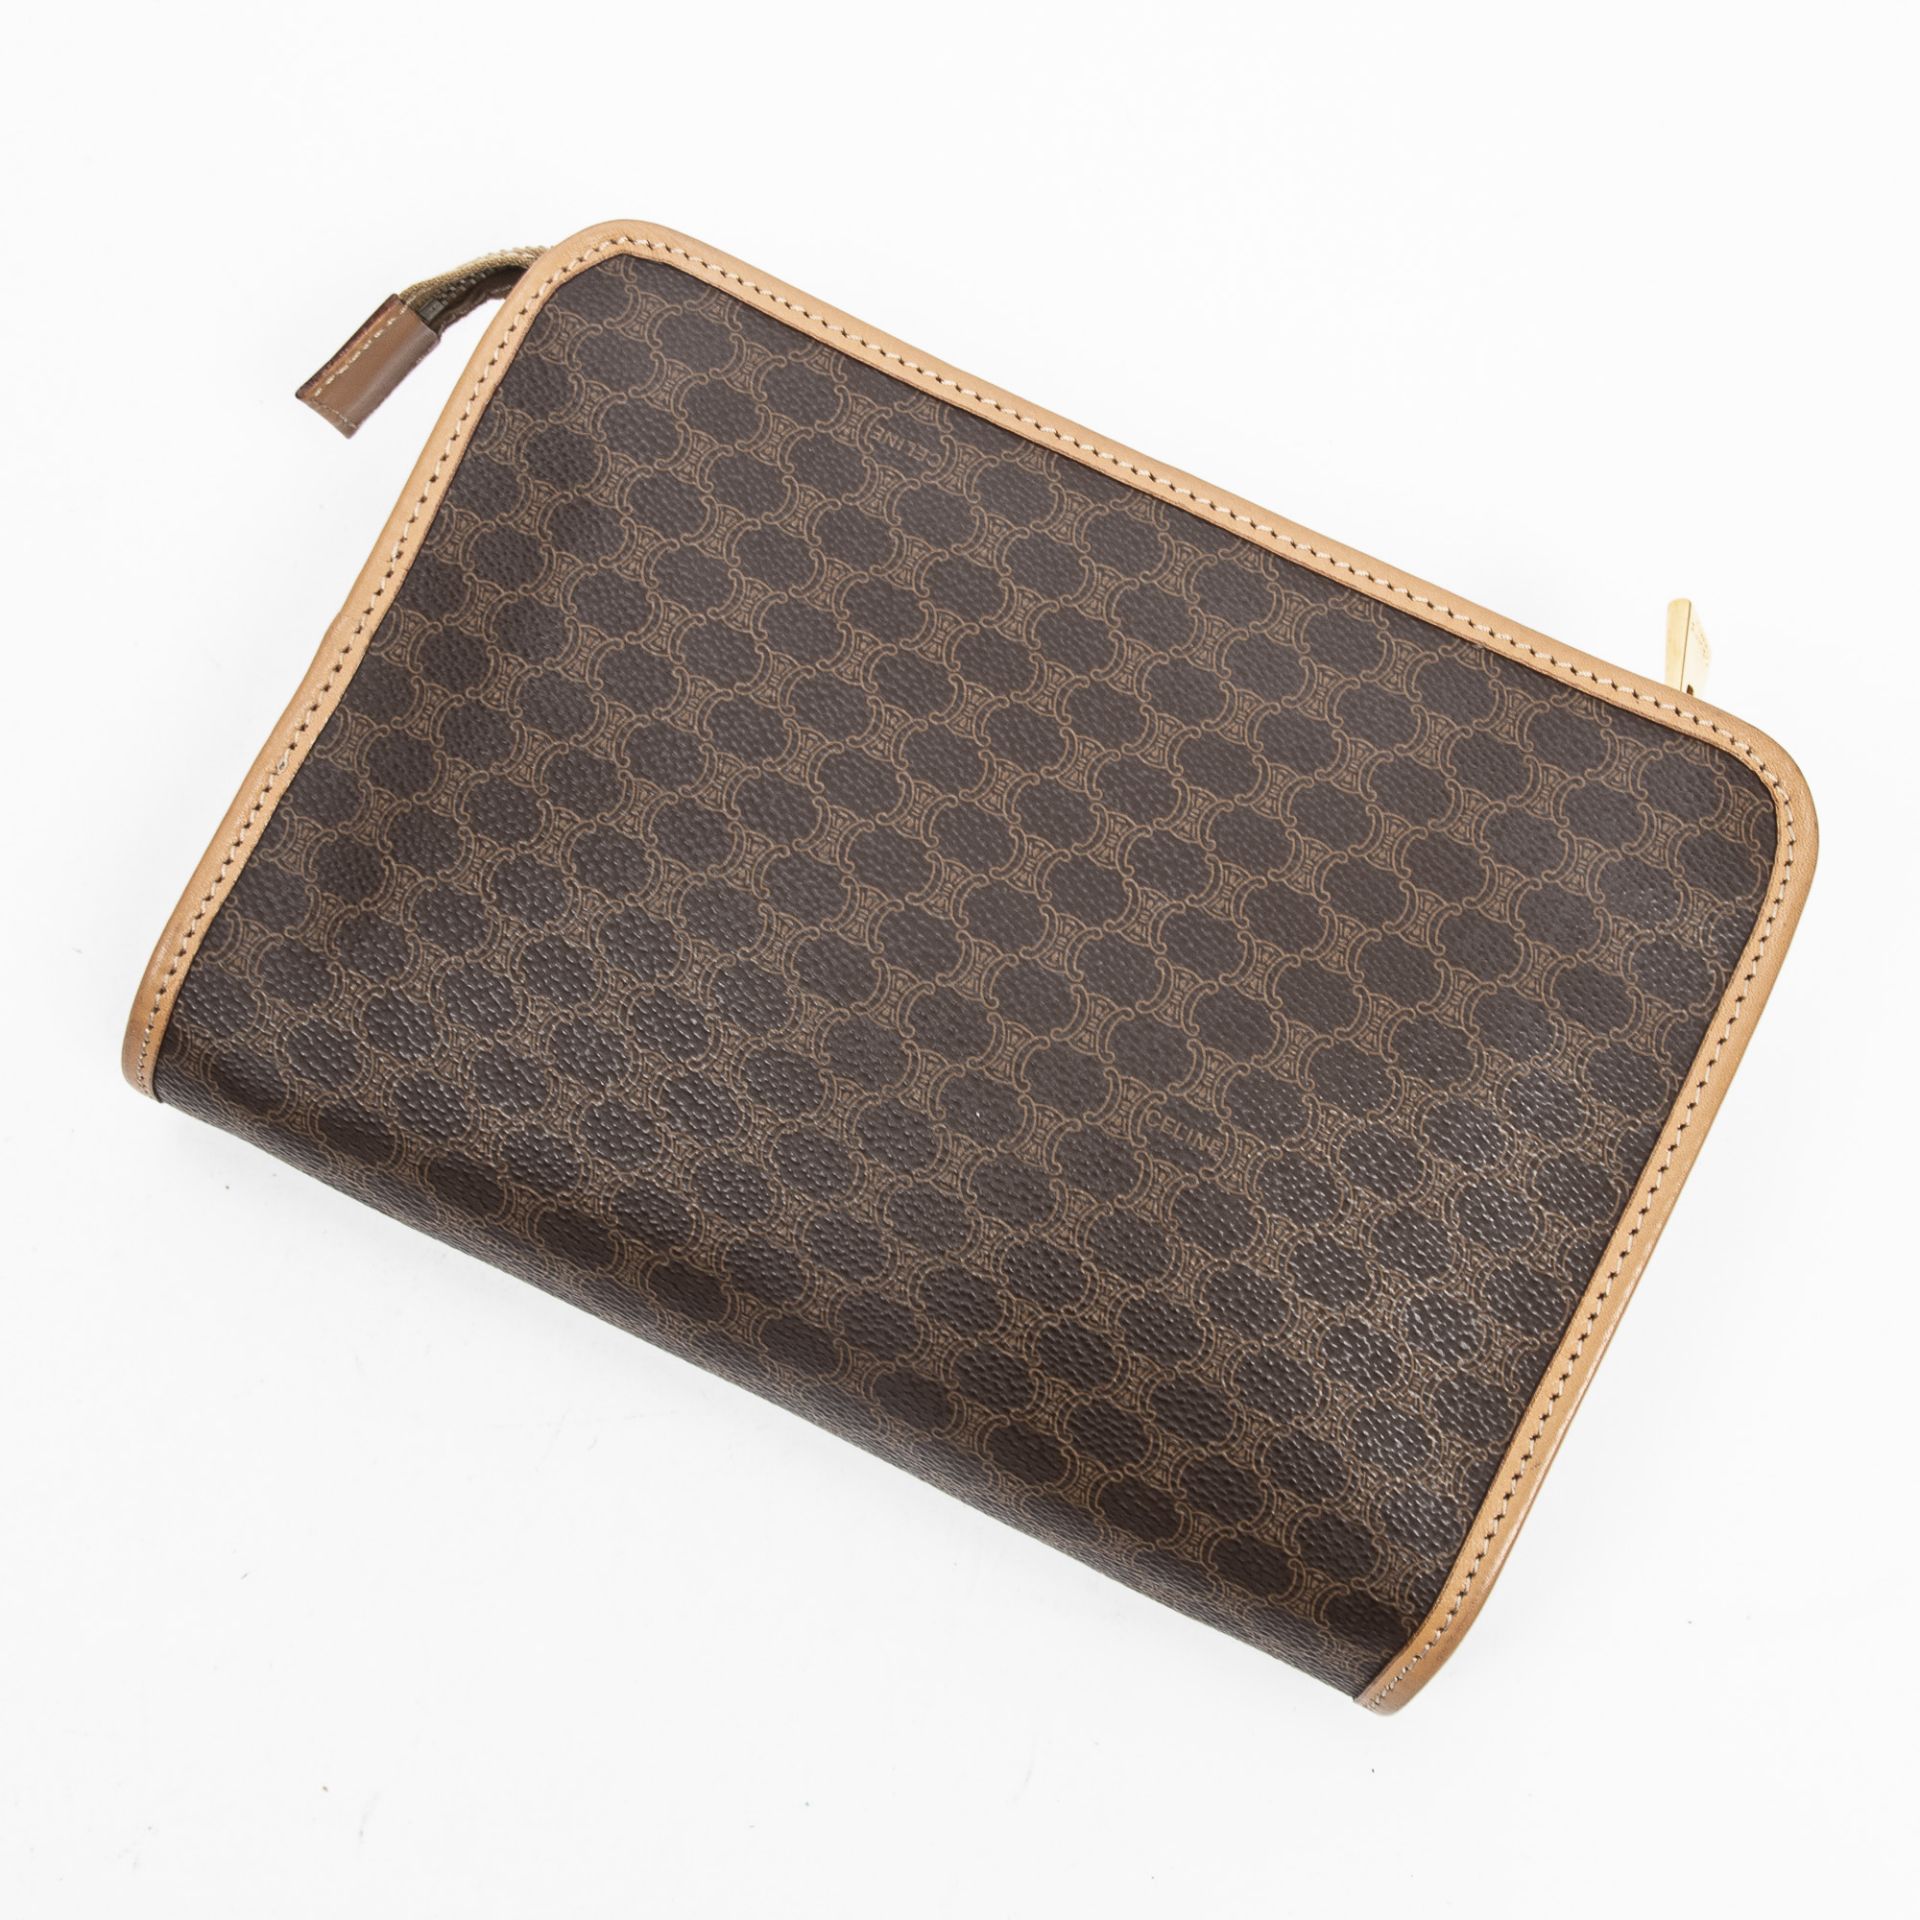 RRP £925.00 Lot To Contain 1 Celine Coated Canvas Vintage Clutch In Brown - 23*17*4cm - A - AAR1152 - Image 2 of 2